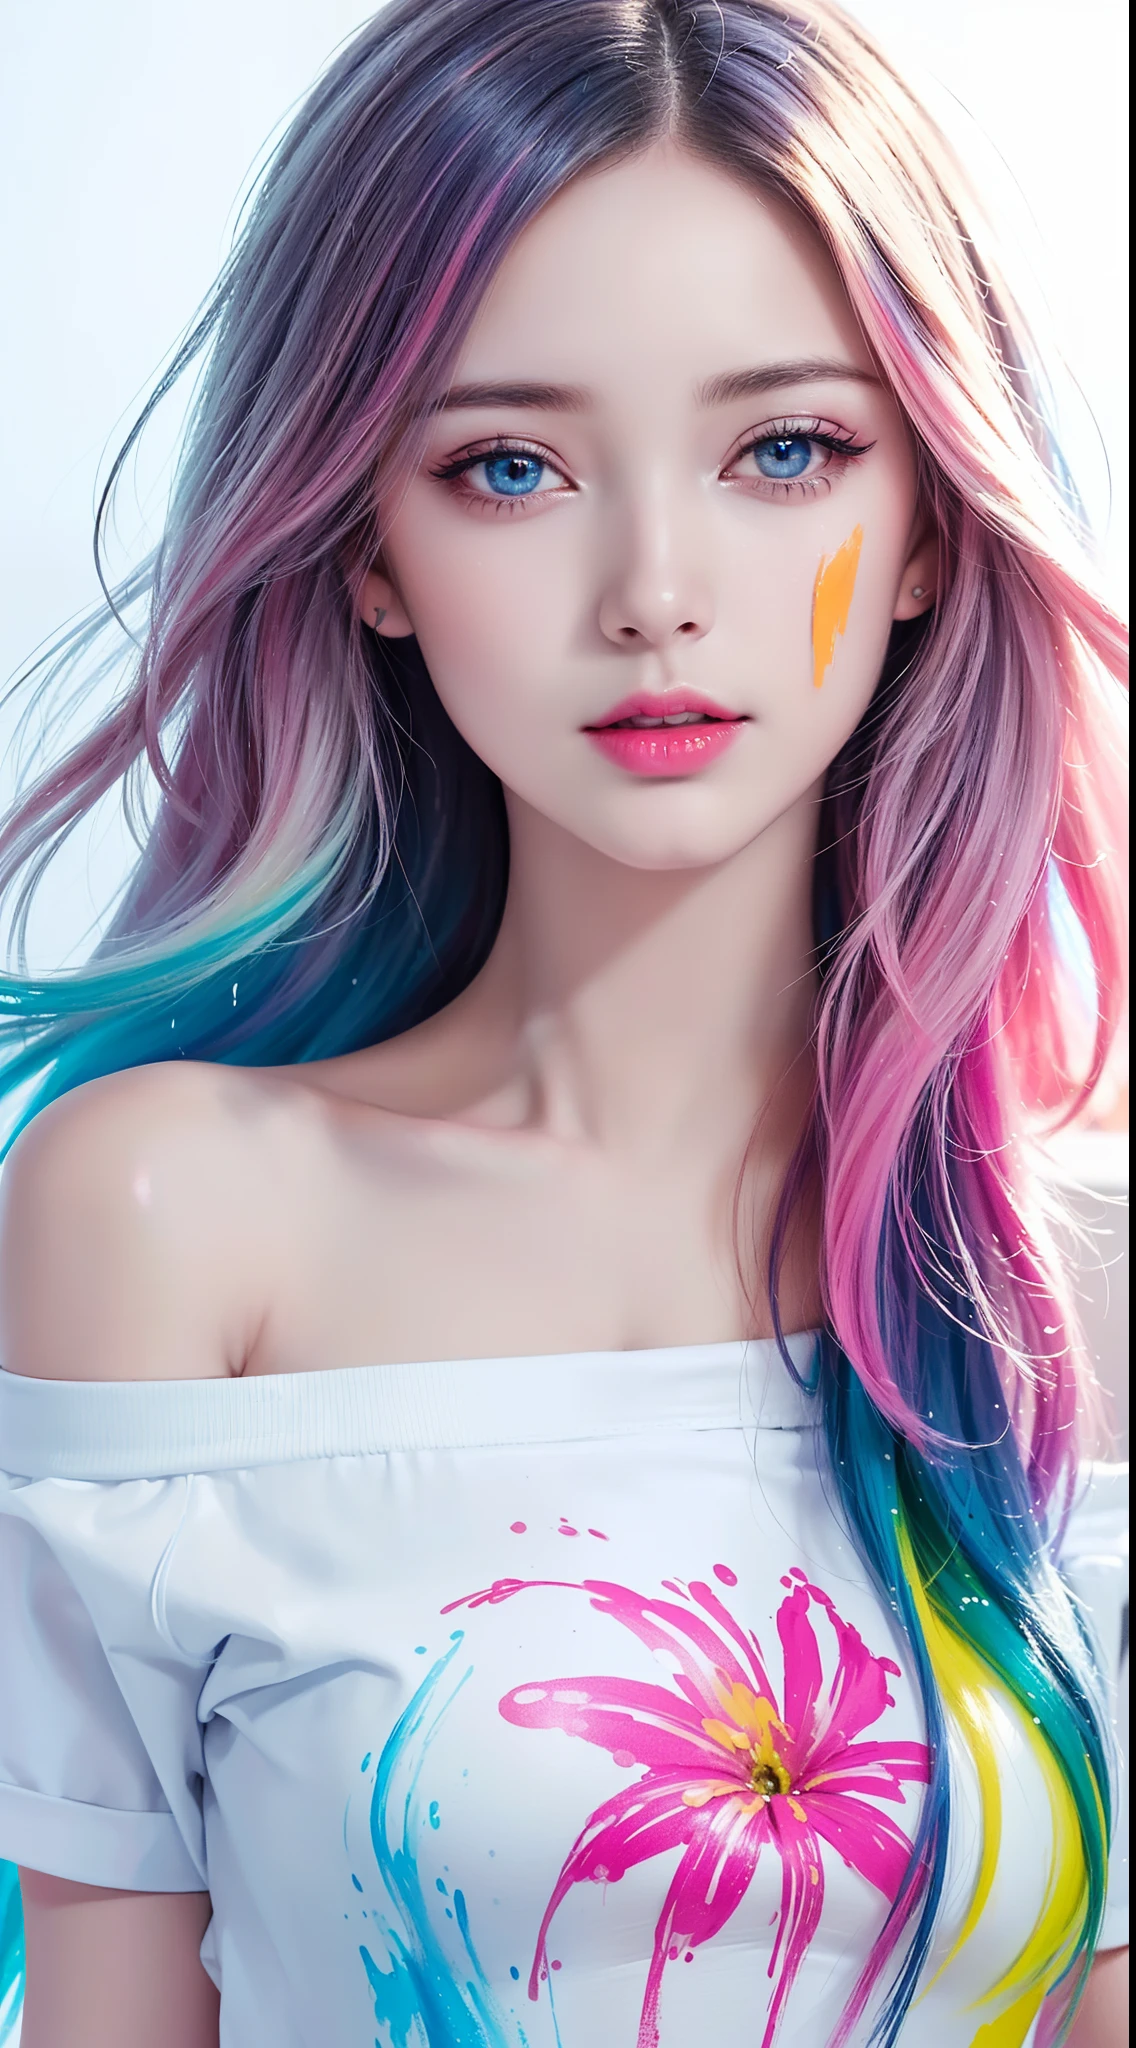 （Pink Fashion T-shirt：1.9），(Colorful hair: 1.8), (all the colours of the rainbow: 1.8),(((((vertical painting：1.6))), （painting：1.6），front, comics, illustrations, paintings, large eyes, crystal clear eyes,（ rainbow color gradient high ponytail：1.7）, exquisite makeup, closed mouth,(Small Fresh: 1.5),(Wipe Chest: 1.6) ，long eyelashes, white off shoulder T-shirt, White Shoulder Shirt，looking at the audience, large watery eyes, (rainbow colored hair：1.6), color splash, （solo：1.8）, color splash, color explosion, thick paint style, messy lines, ((shining))，(colorful), (colorful), (colorful), colorful, Thick Paint Style, (Splash) (Color Splash), Vertical Painting, Upper Body, Paint Splash, Acrylic Pigment, Gradient, Paint, Highest Image Quality, Highest Quality, Masterpiece, Solo, Depth of Field, Face Paint, colorful clothes, (Elegant: 1.2), gorgeous,long hair, wind, (Elegant: 1.3), (Petals: 1.4)，(((masterpiece))),(((best quality))),((ultra-detailed)),(illustration),(dynamic angle),((floating)),(paint),((disheveled hair)),(solo),(1girl) , (((detailed anima face))),((beautiful detailed face)),collar,bare shoulders,white hair, ((colorful hair)),((streaked hair)),beautiful detailed eyes,(Gradient color eyes),(((colorful eyes))),(((colorful background))),(((high saturation))),(((surrounded by colorful splashes))),